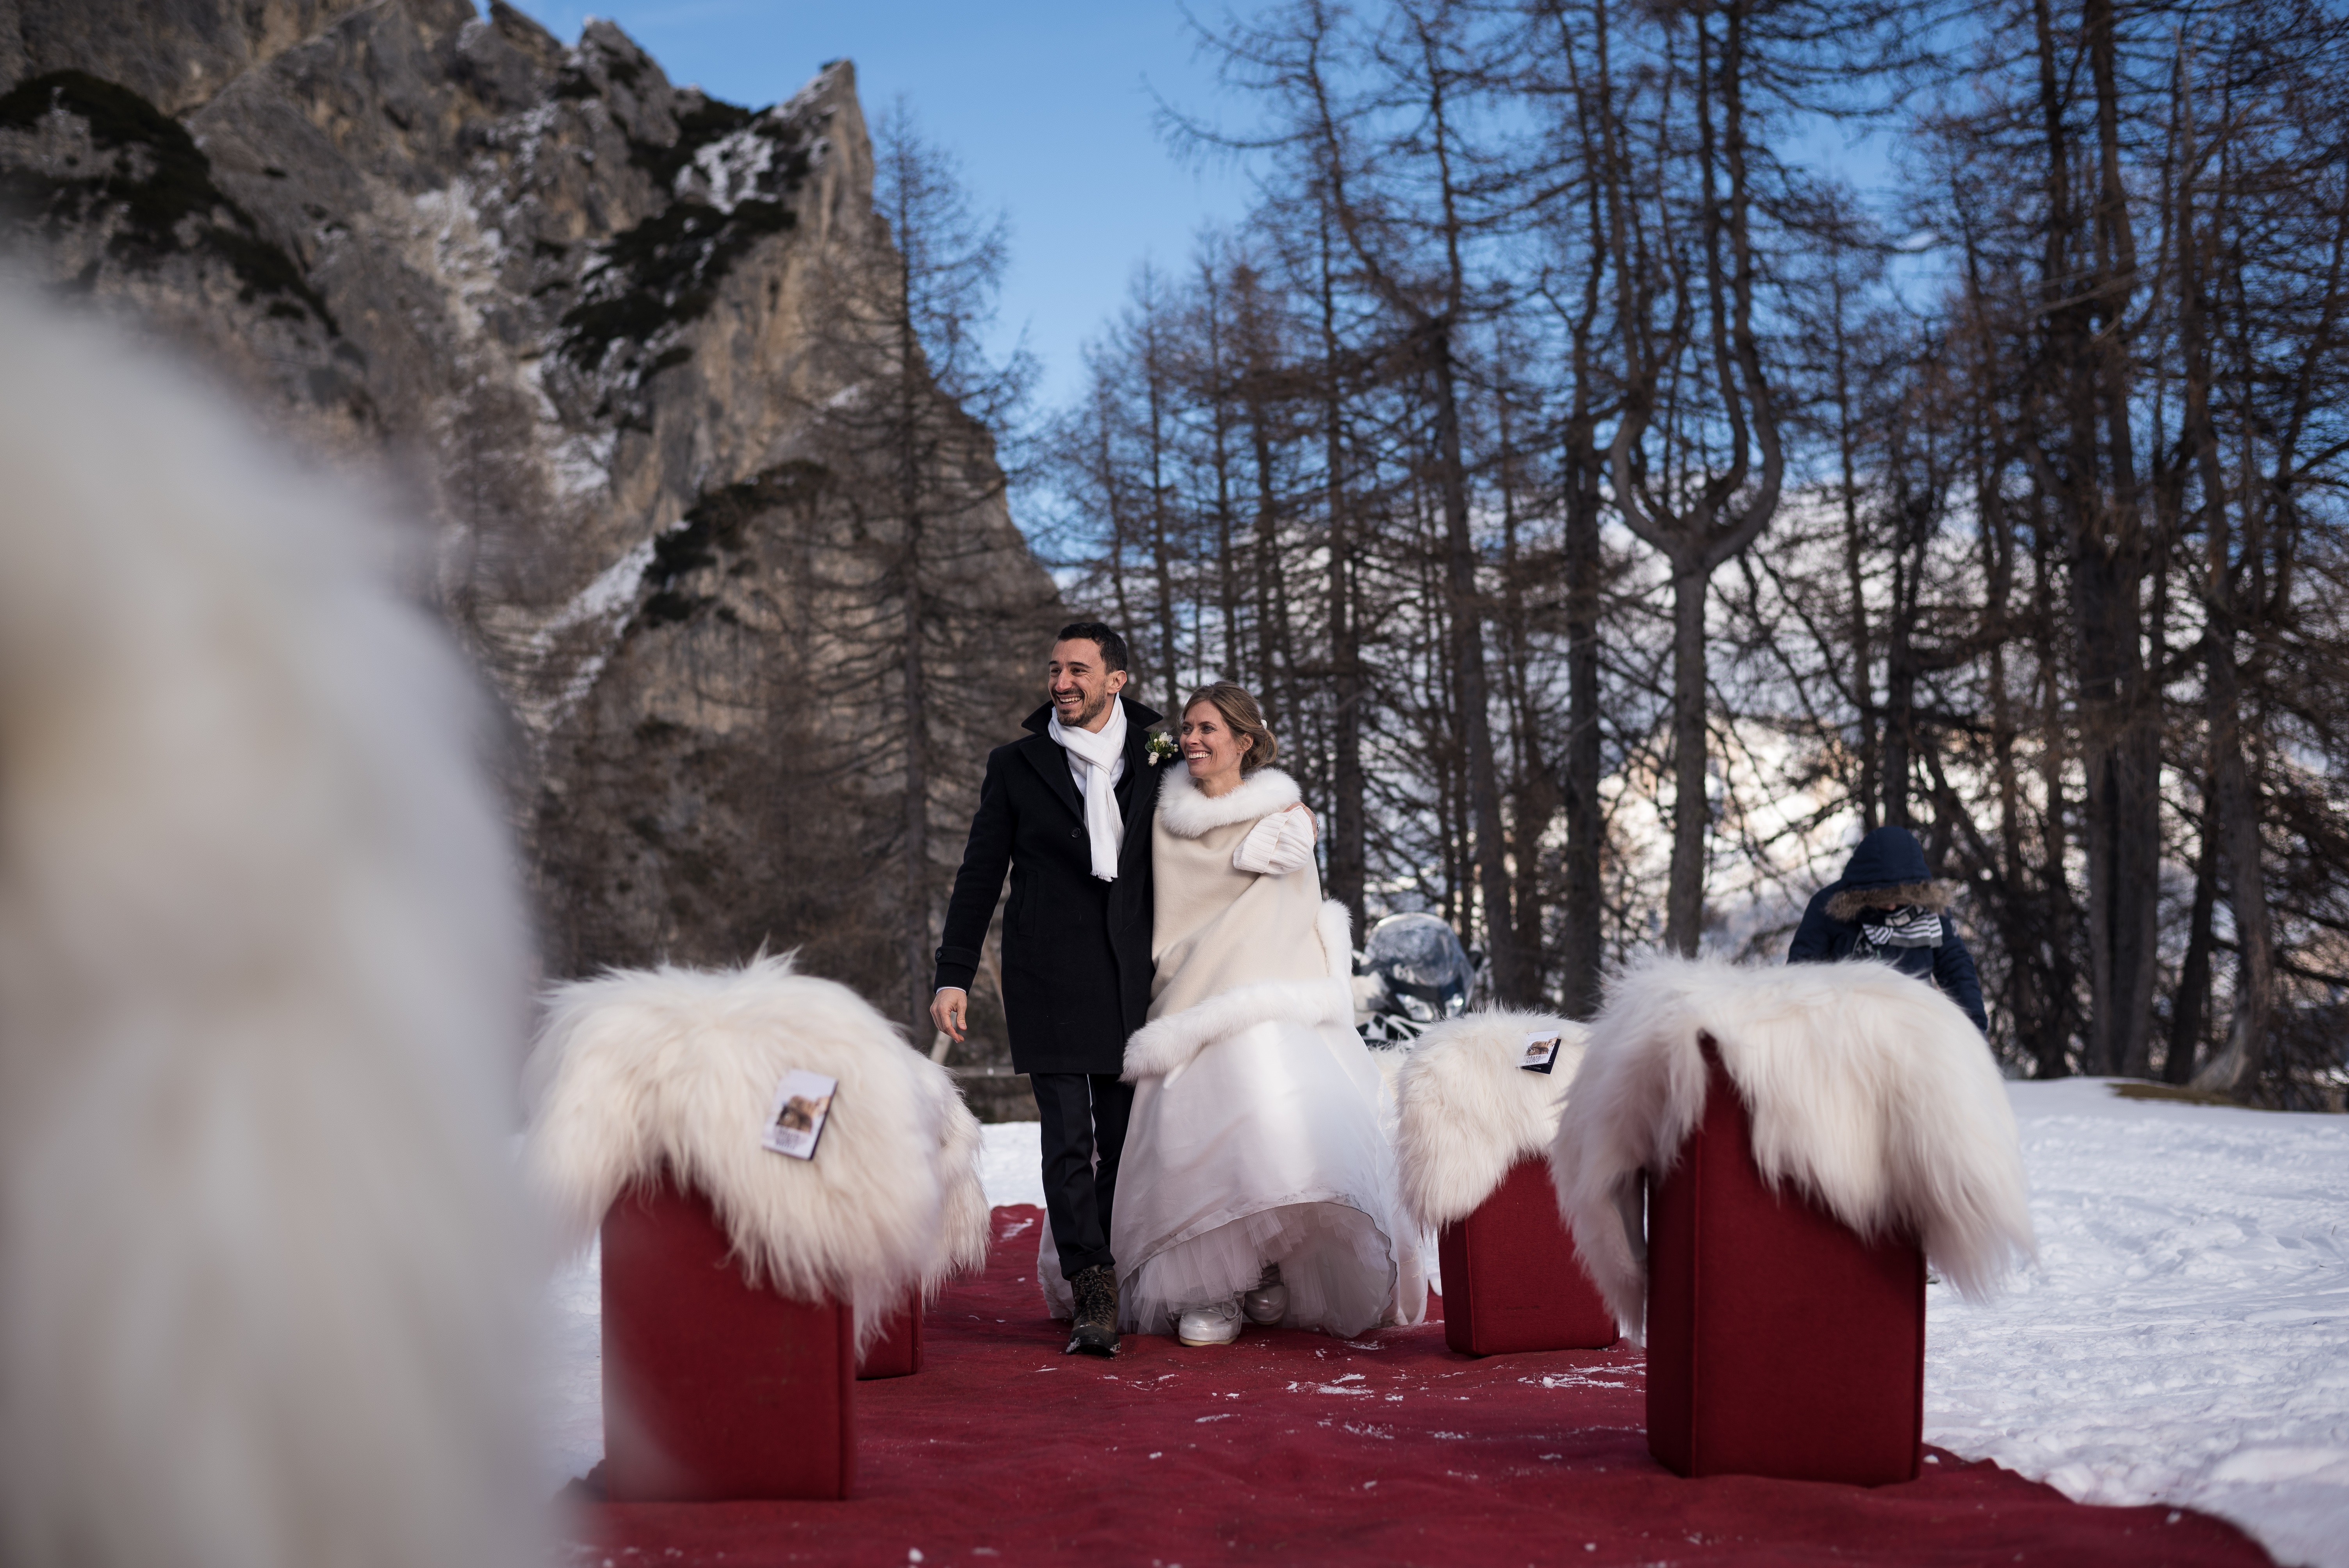 bride and groom walking down a red carpet aisle in snow mountains